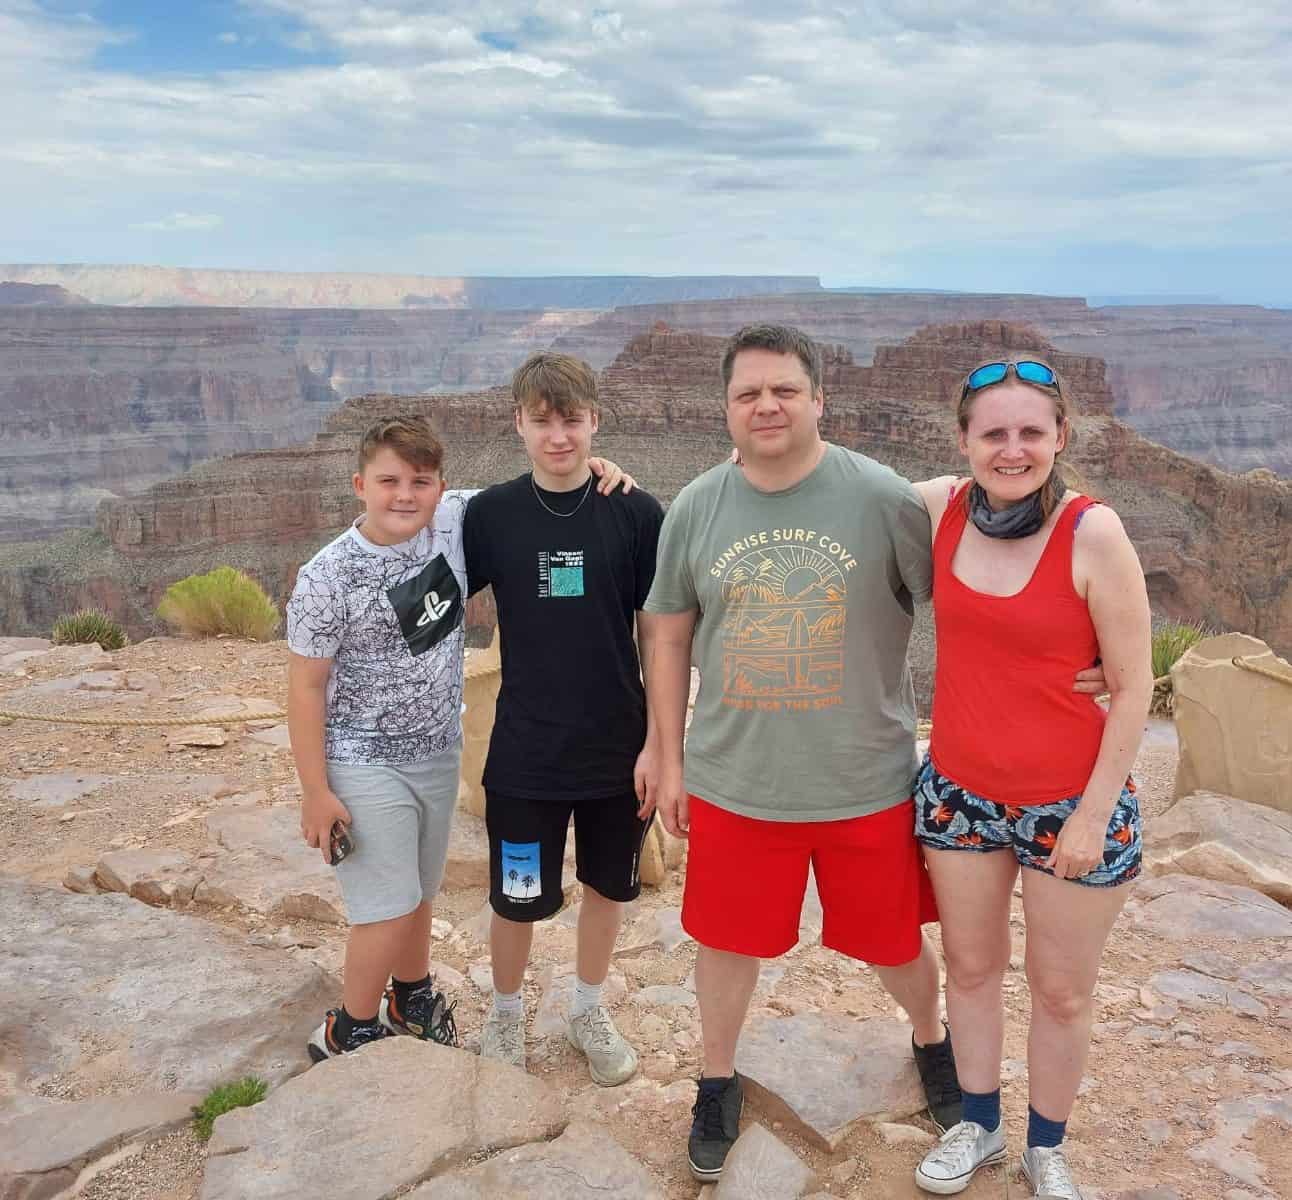 Gareth standing with his two sons and wife on a hike